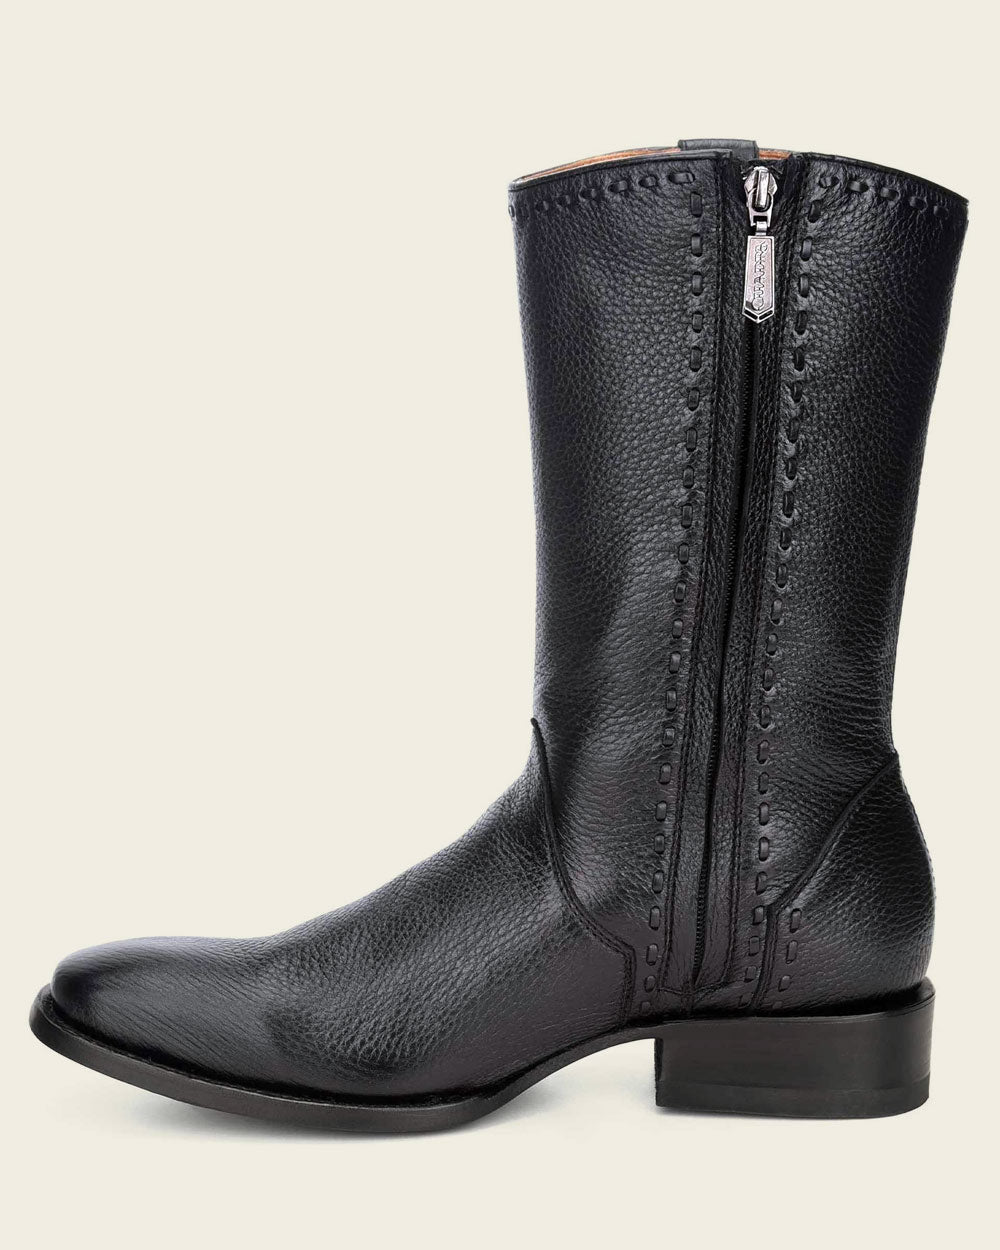 Easy slip-on with inner zipper: Comfort & style in flawless leather boots.